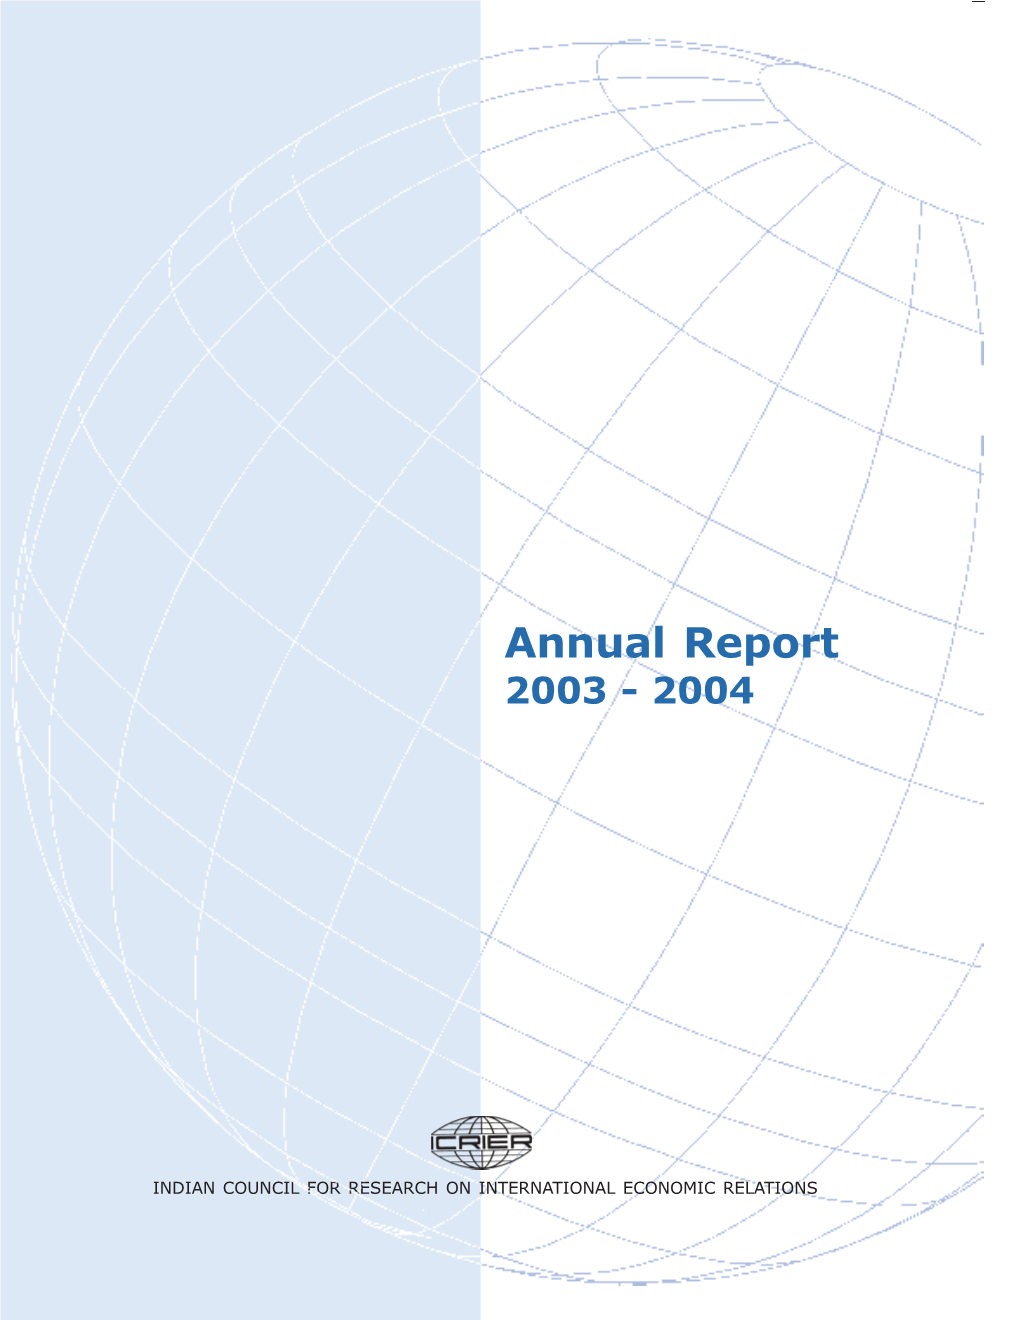 Annual Report ICRIER-2004-104 Final-Output 2.P65